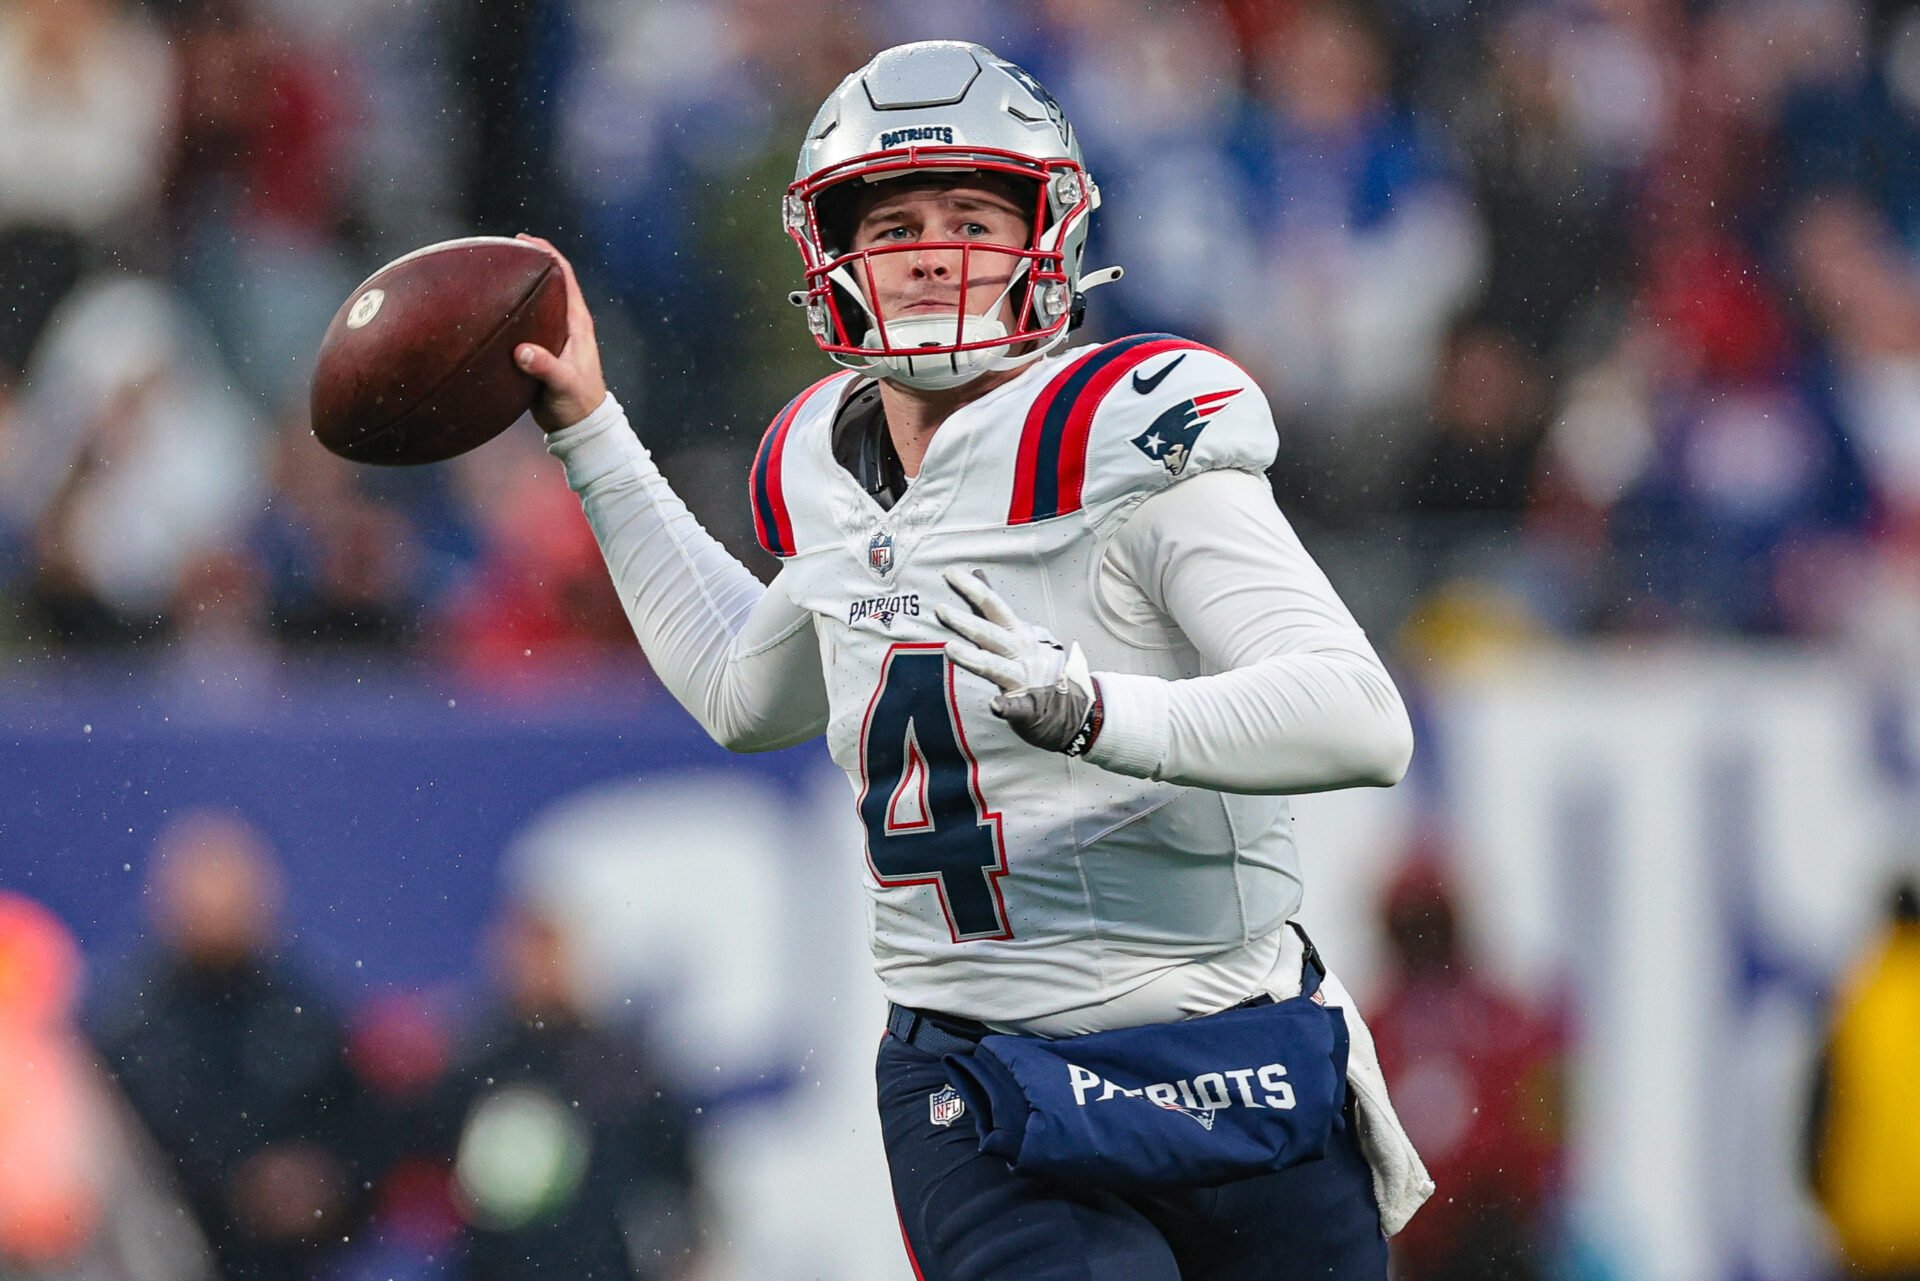 New England Patriots quarterback Bailey Zappe (4) throws the ball during the second half against the New York Giants at MetLife Stadium.